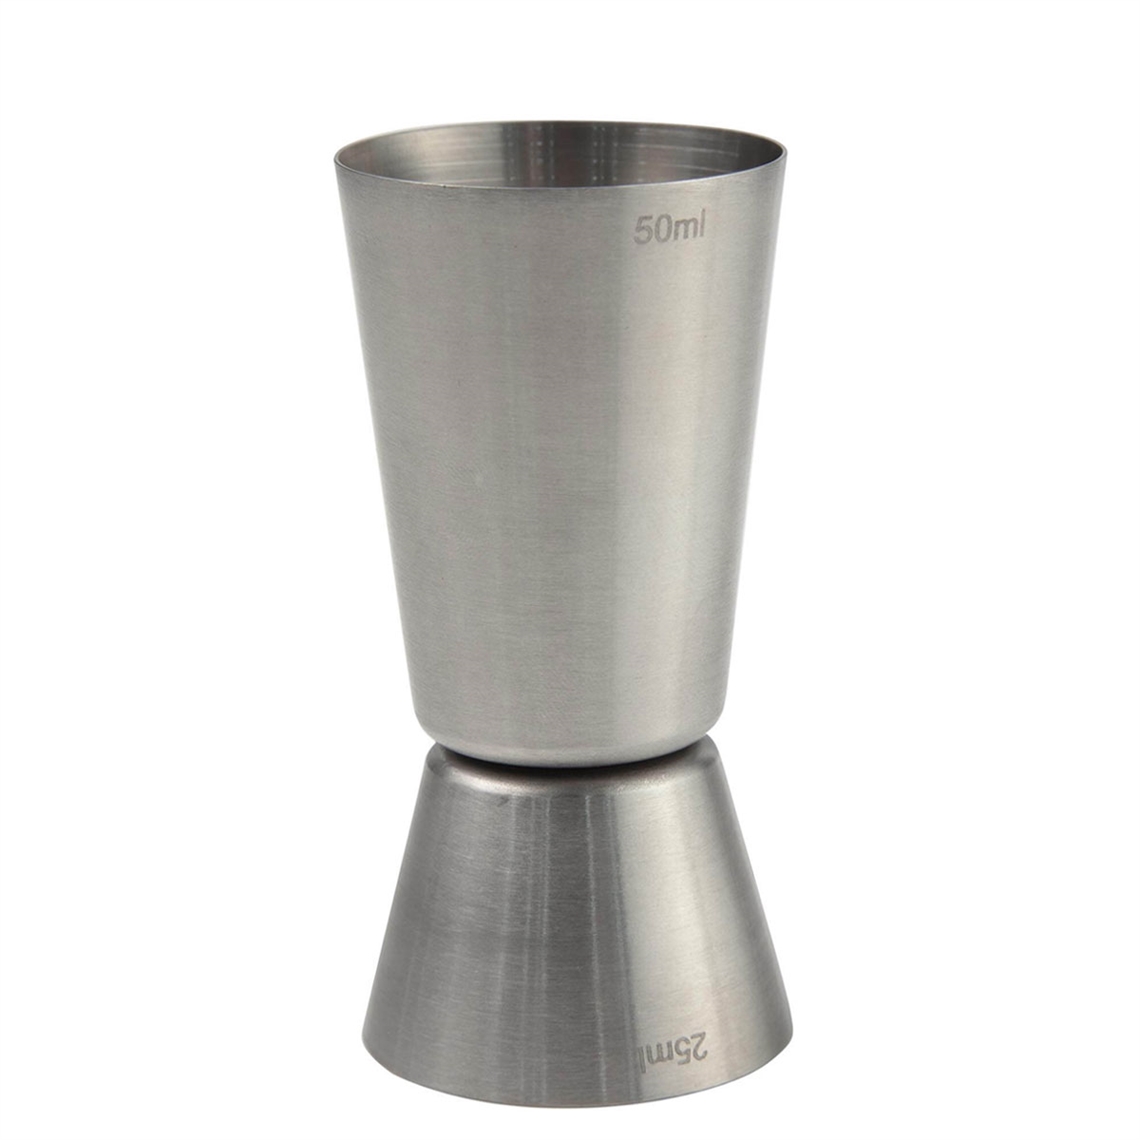 View more ice buckets from our Spirit and Wine Bar Thimble Measures range